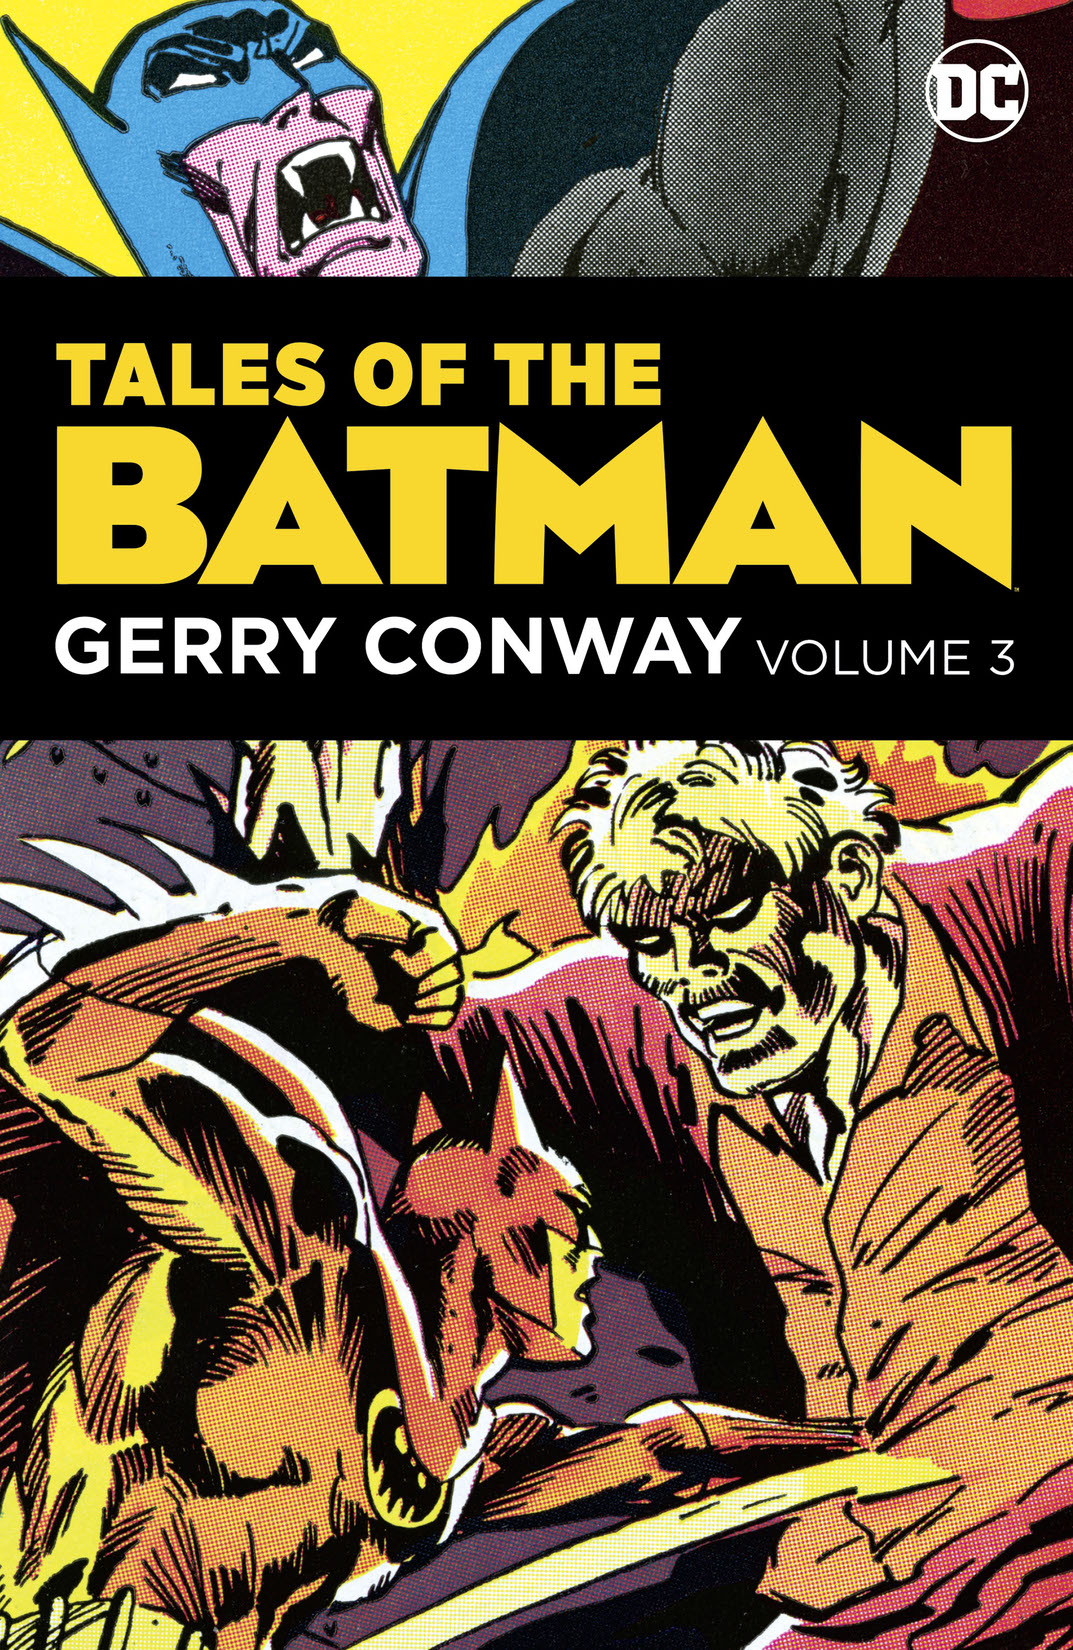 Tales of the Batman: Gerry Conway Vol. 3 preview images